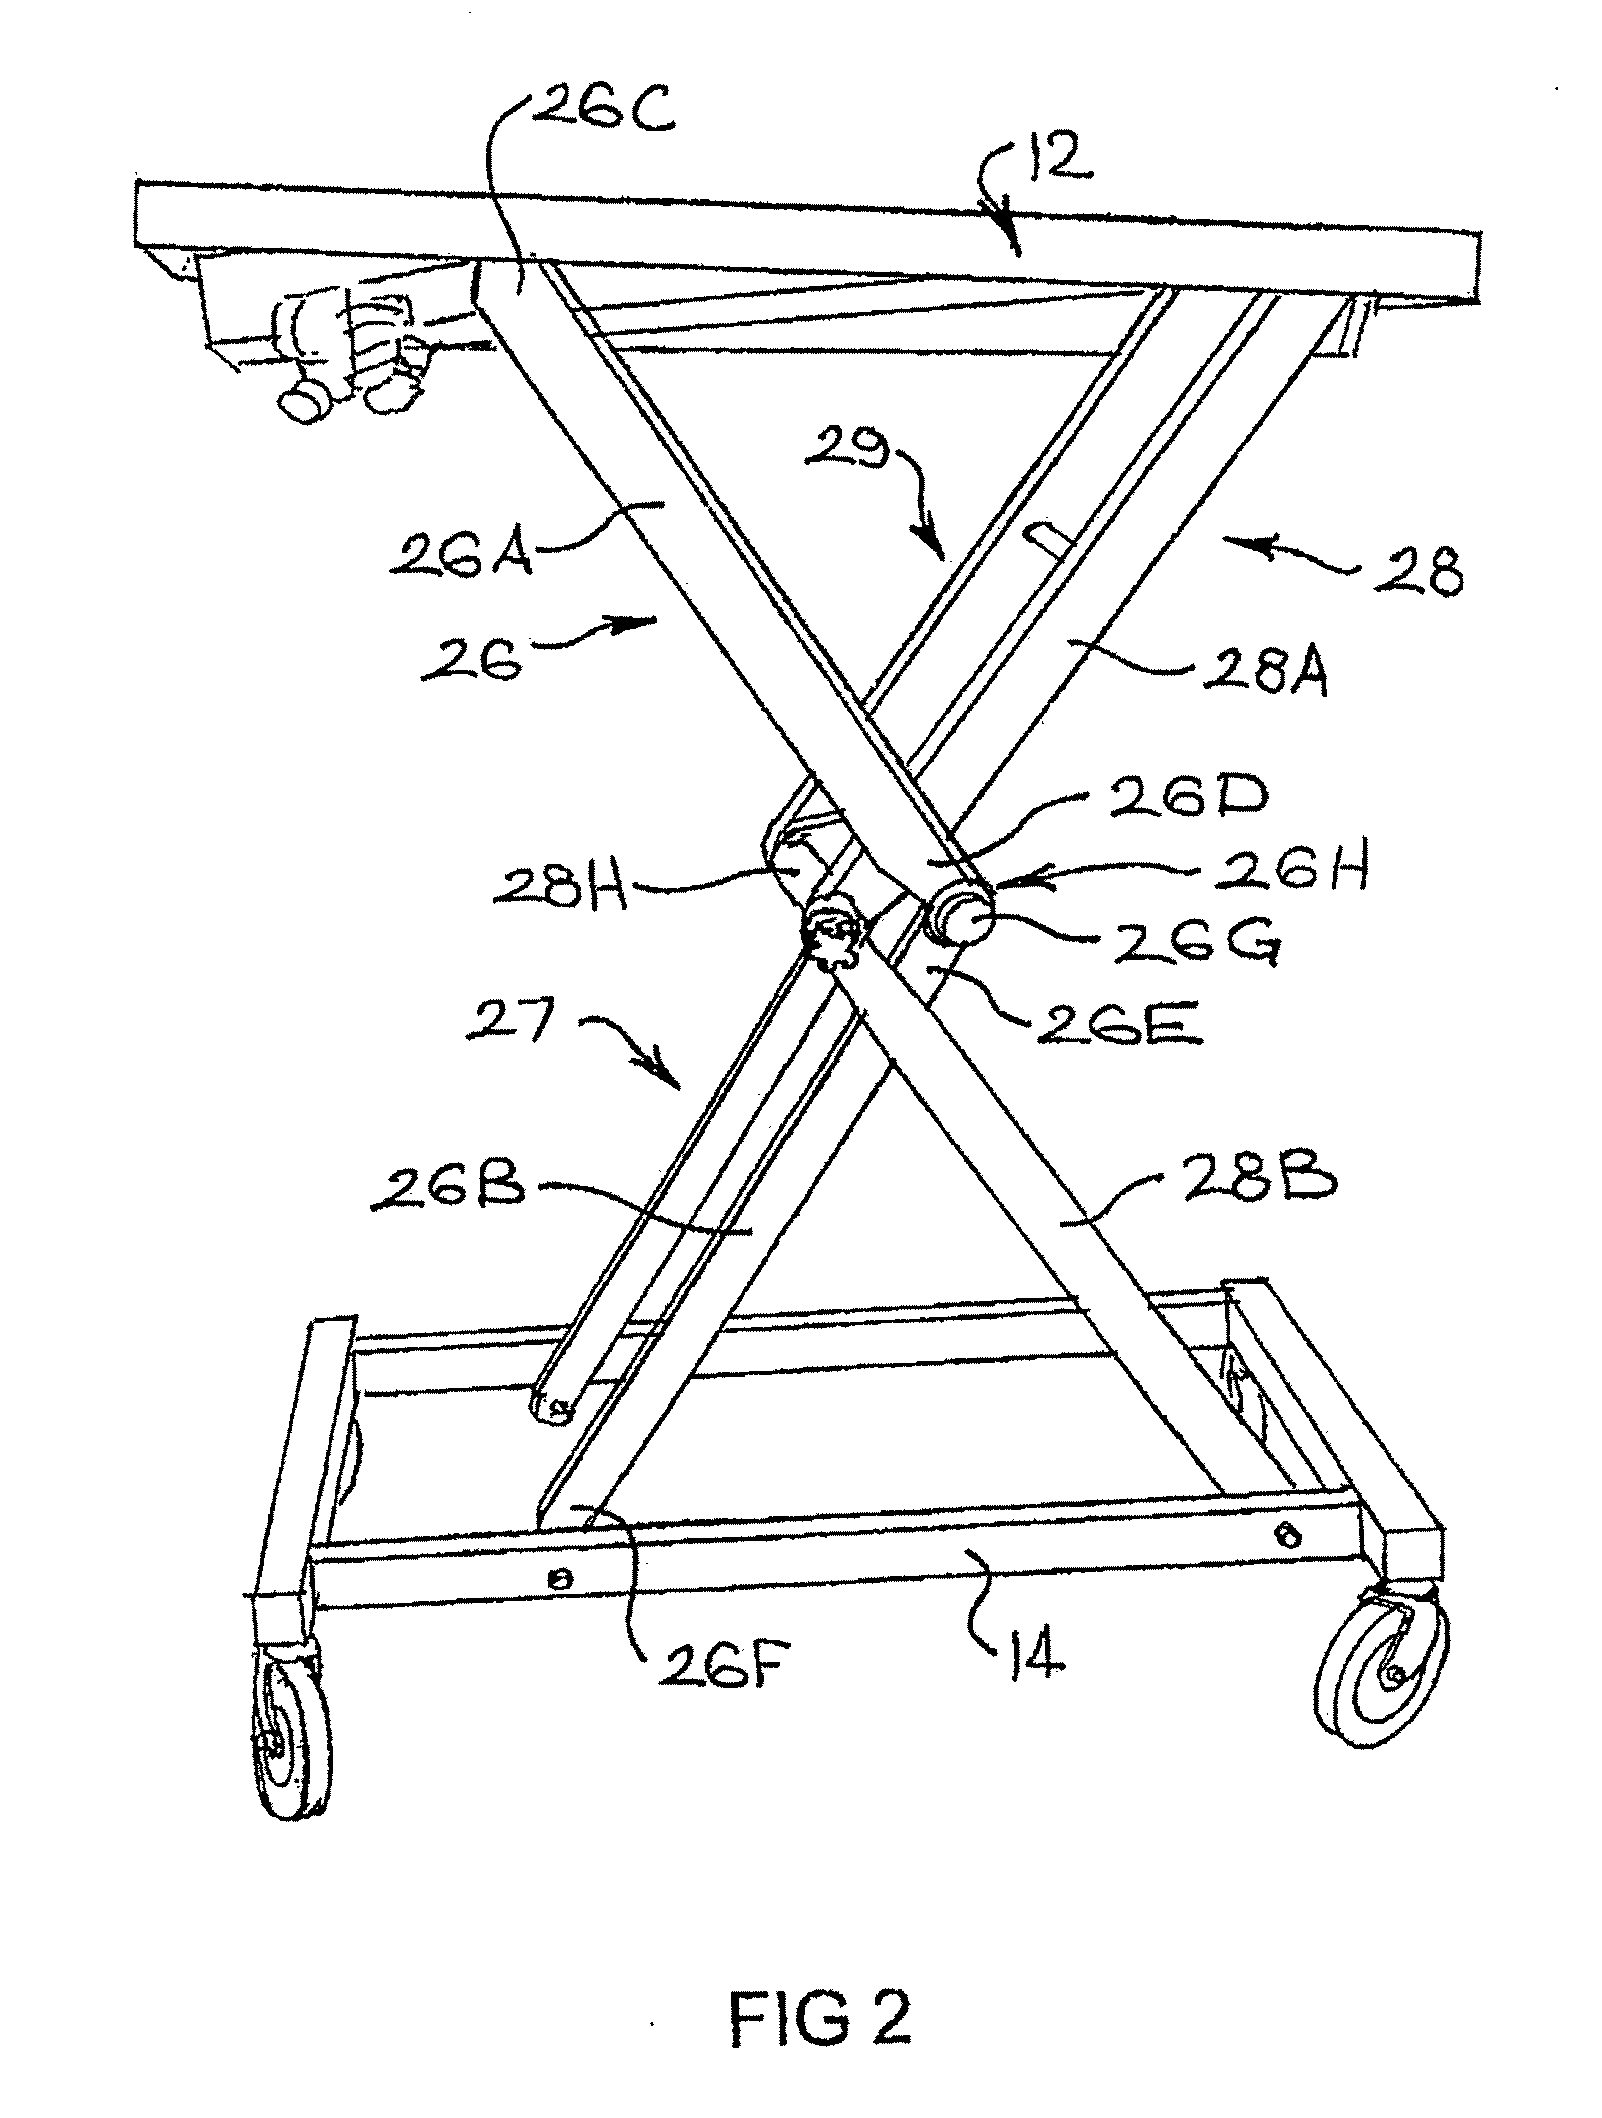 Surgical table